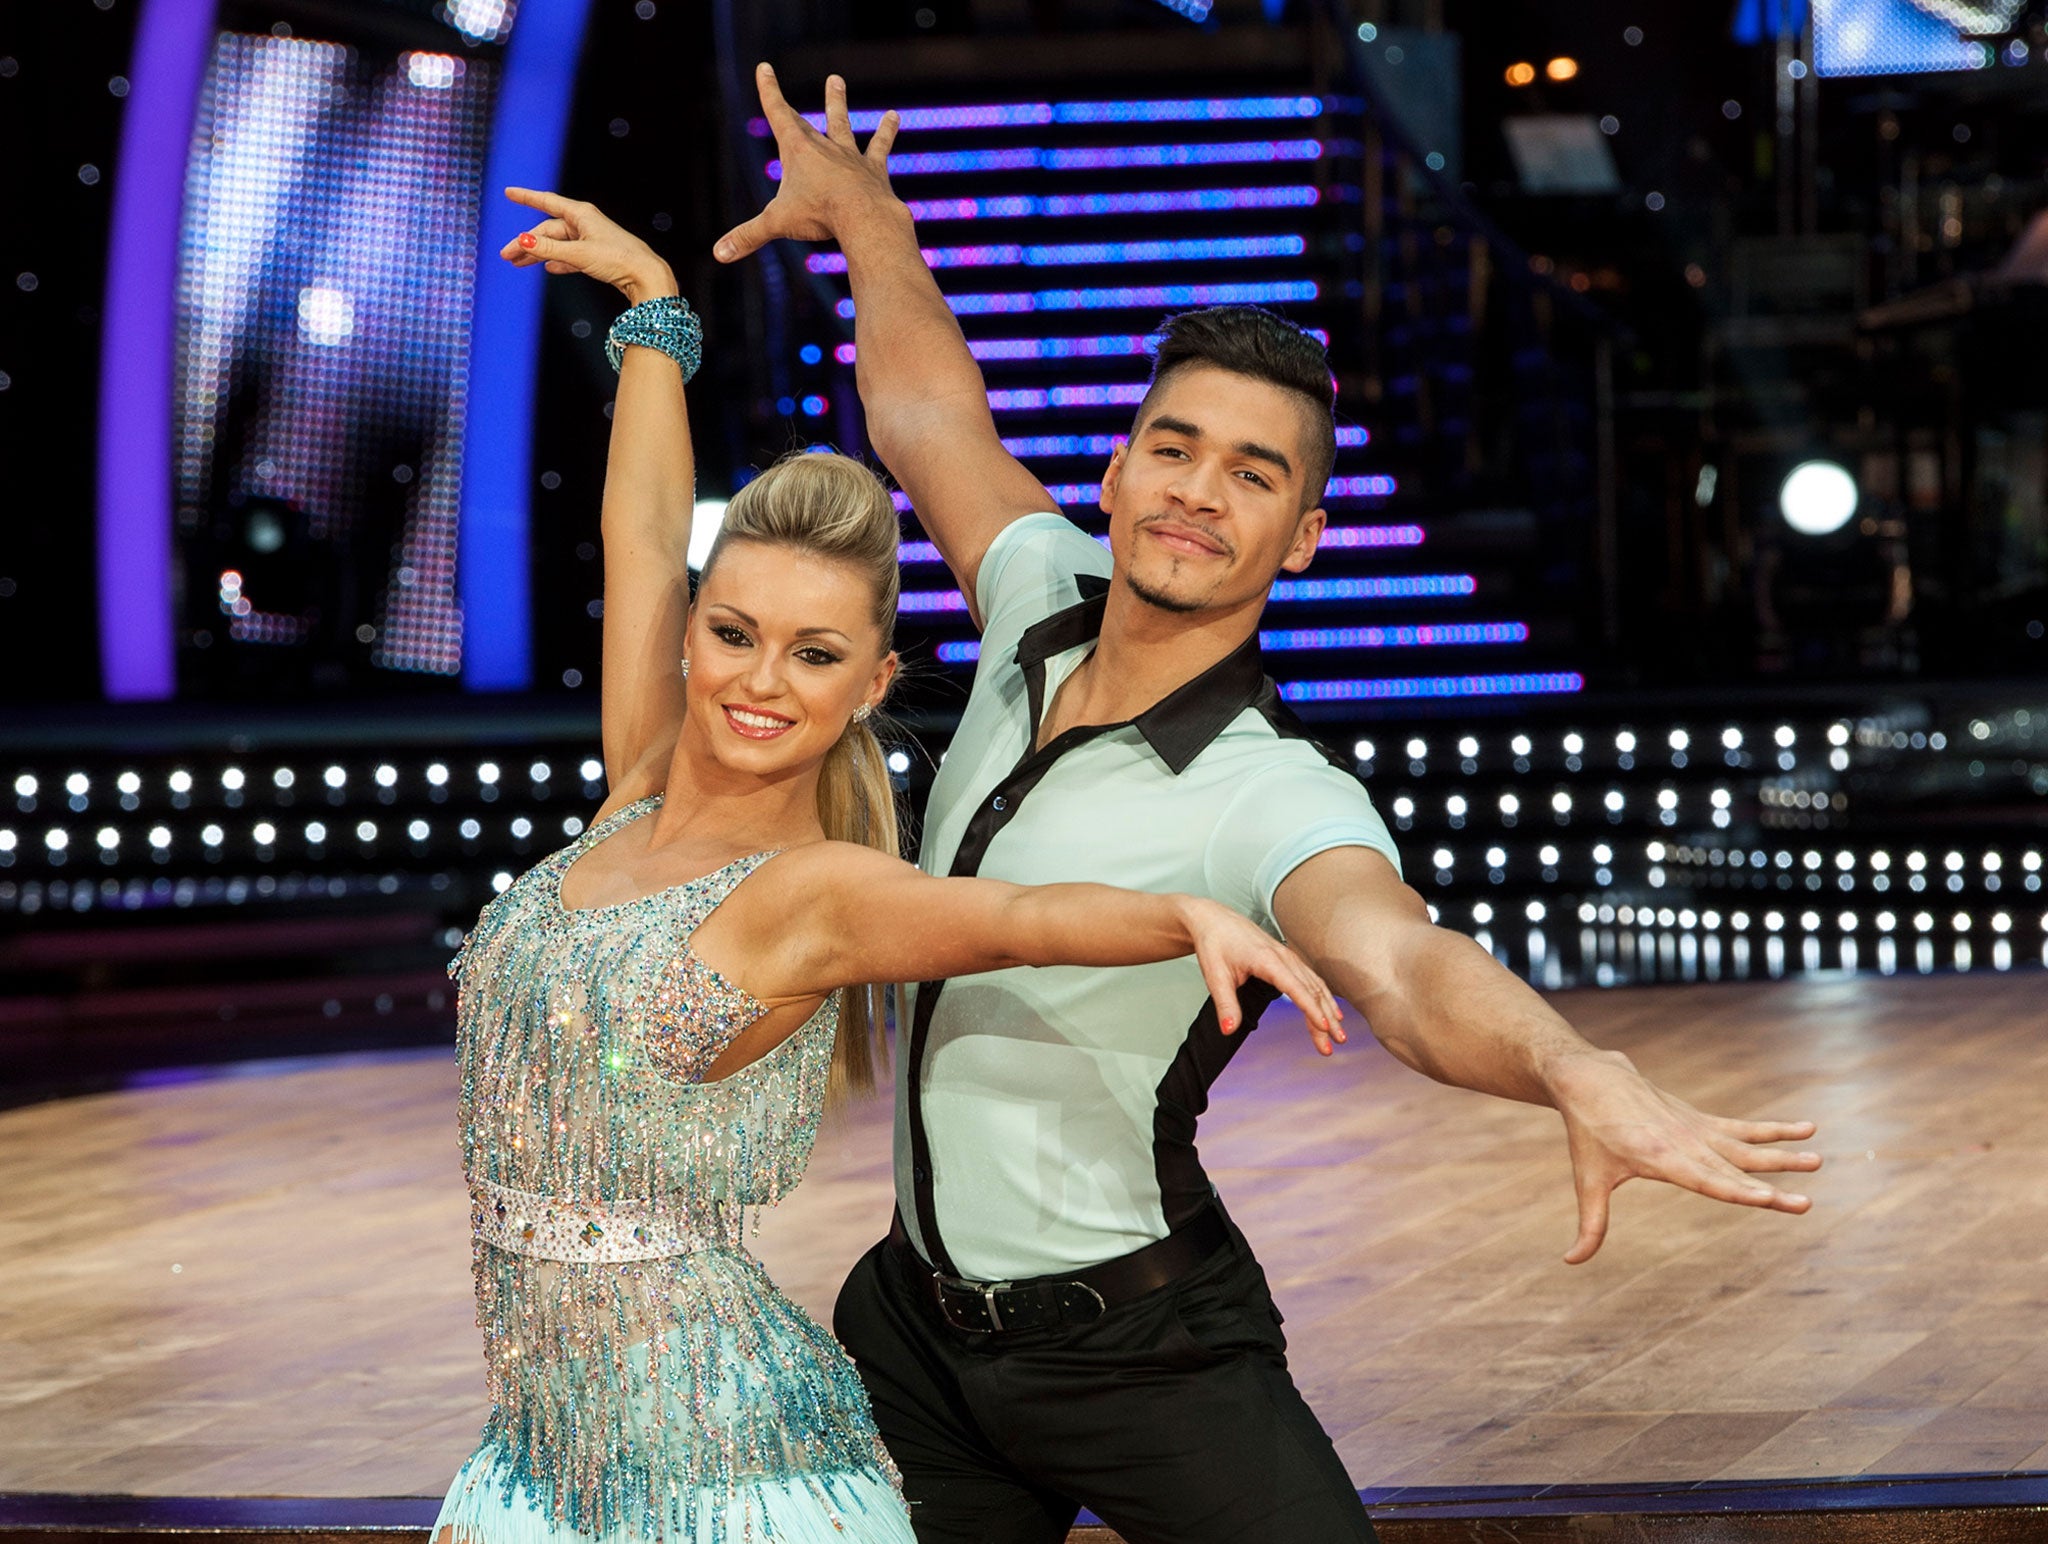 The BBC could face having to move Strictly Come Dancing from its Saturday night slot